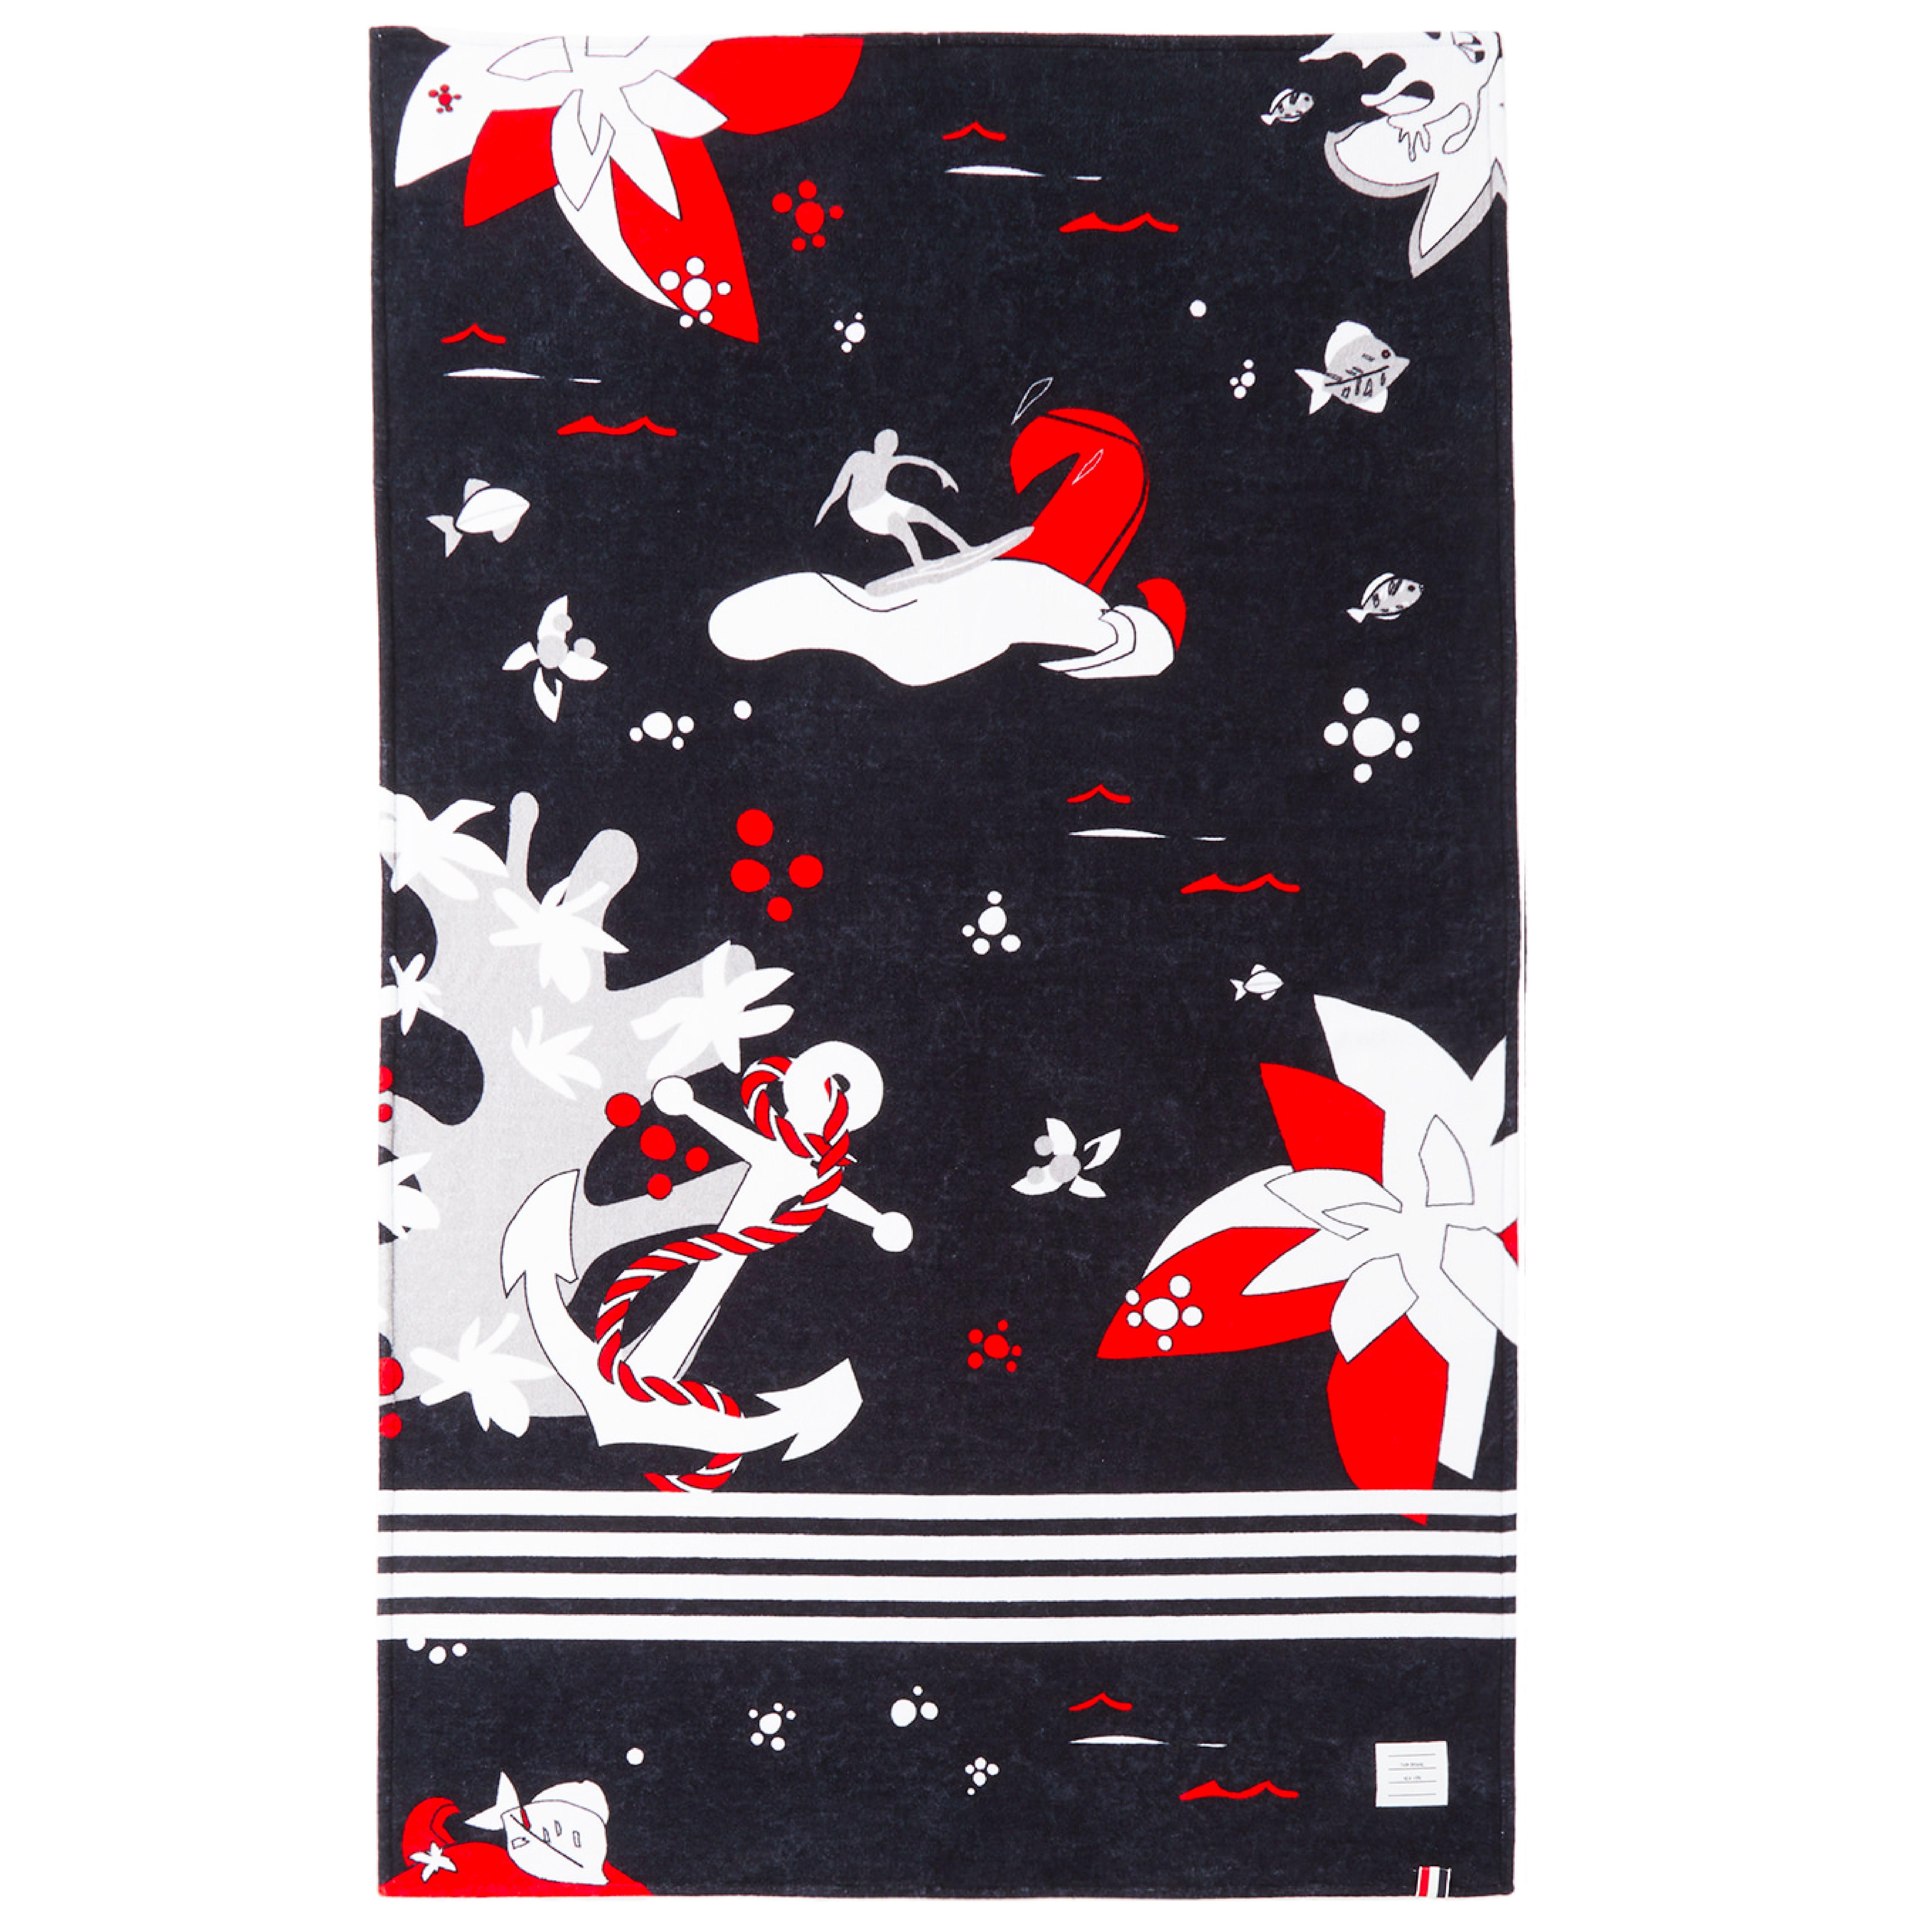 Thom Browne Navy and Red Hawaiian pattern beach towel. Rectangular cotton terrycloth towel in navy featuring graphic pattern in red, white, and grey throughout. Signature stripes in white at length. White textile logo patch and signature tricolor